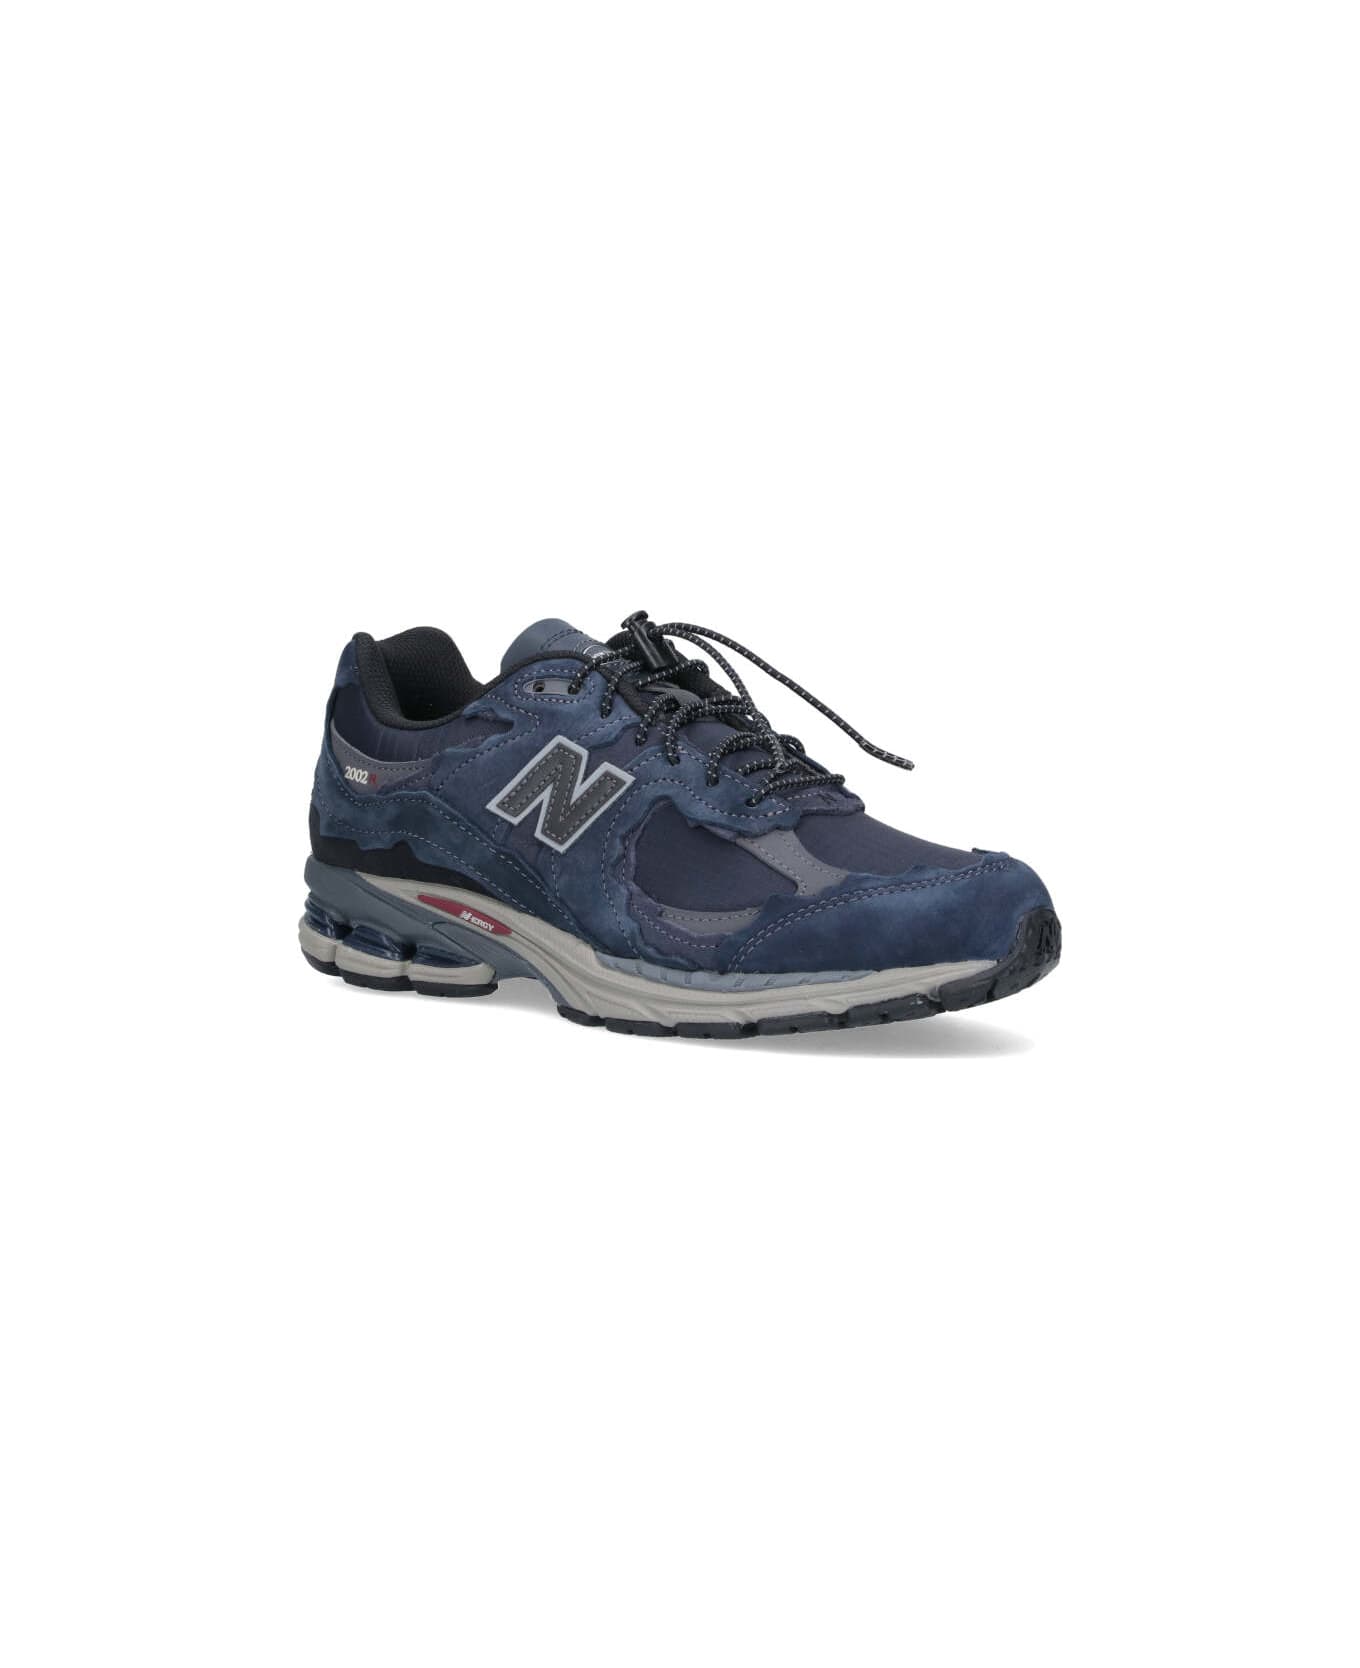 New Balance "2002r Protection Pack" Sneakers - Blue スニーカー